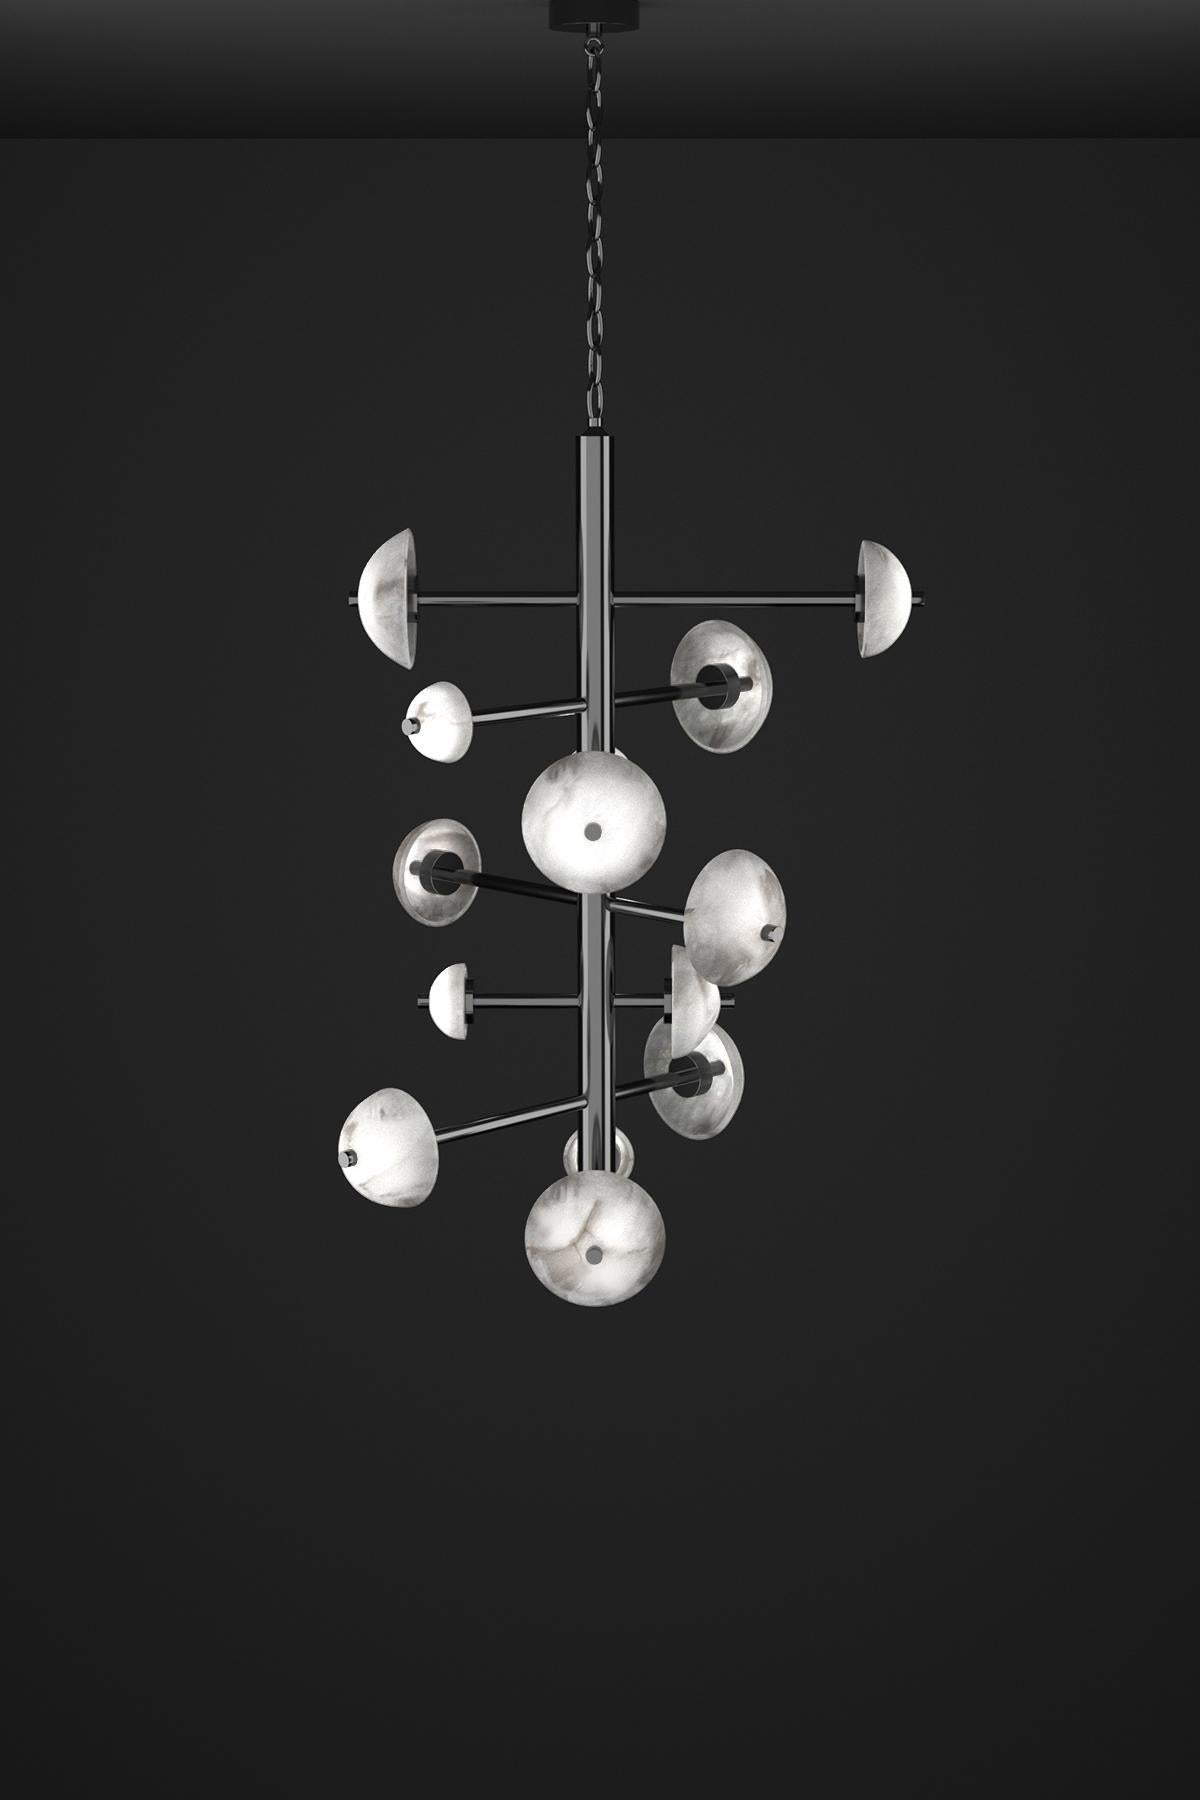 Apollo Shiny Black Metal Chandelier by Alabastro Italiano
Dimensions: D 70,5 x W 55 x H 111 cm.
Materials: White alabaster and metal.

Available in different finishes: Shiny Silver, Bronze, Brushed Brass, Ruggine of Florence, Brushed Burnished,